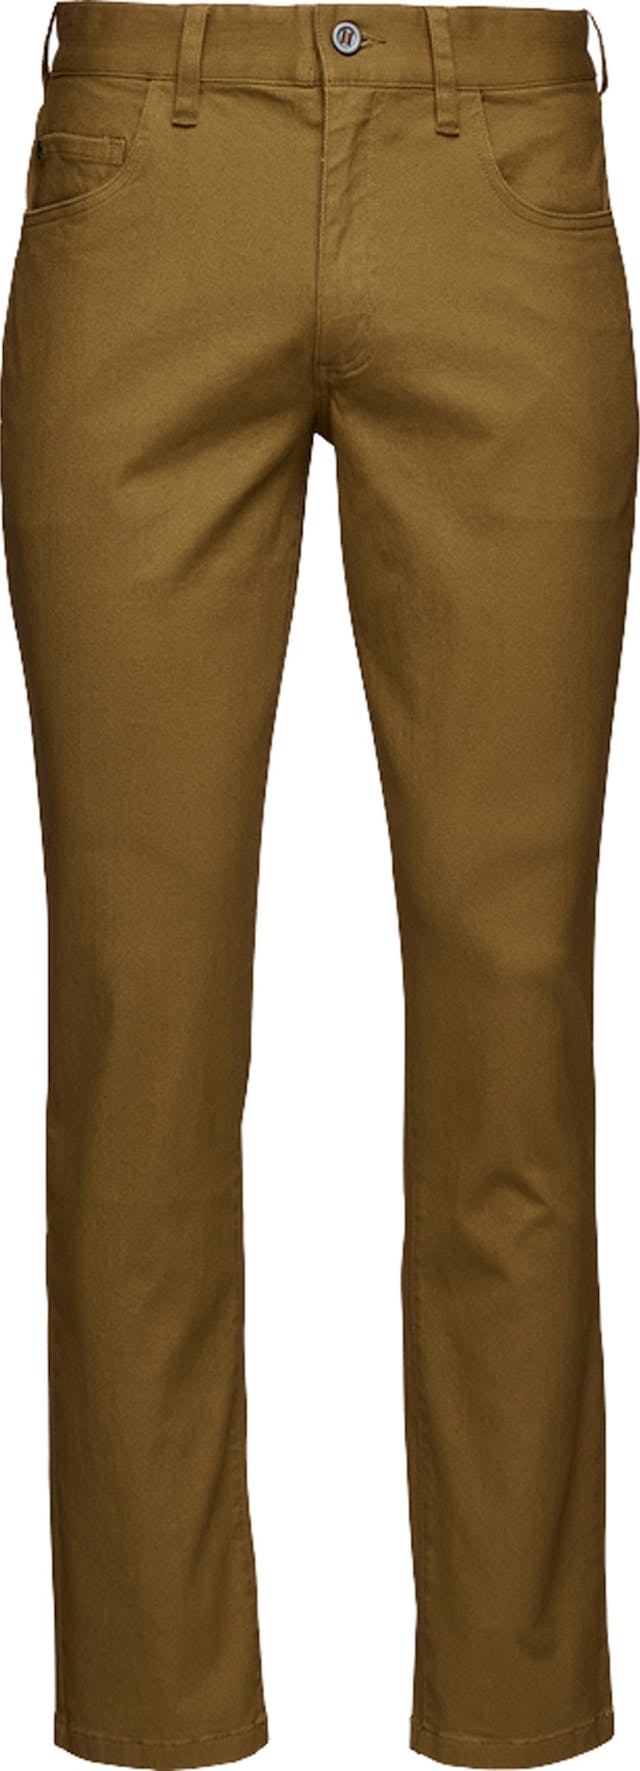 Product image for Stretch Font Pants - Men's